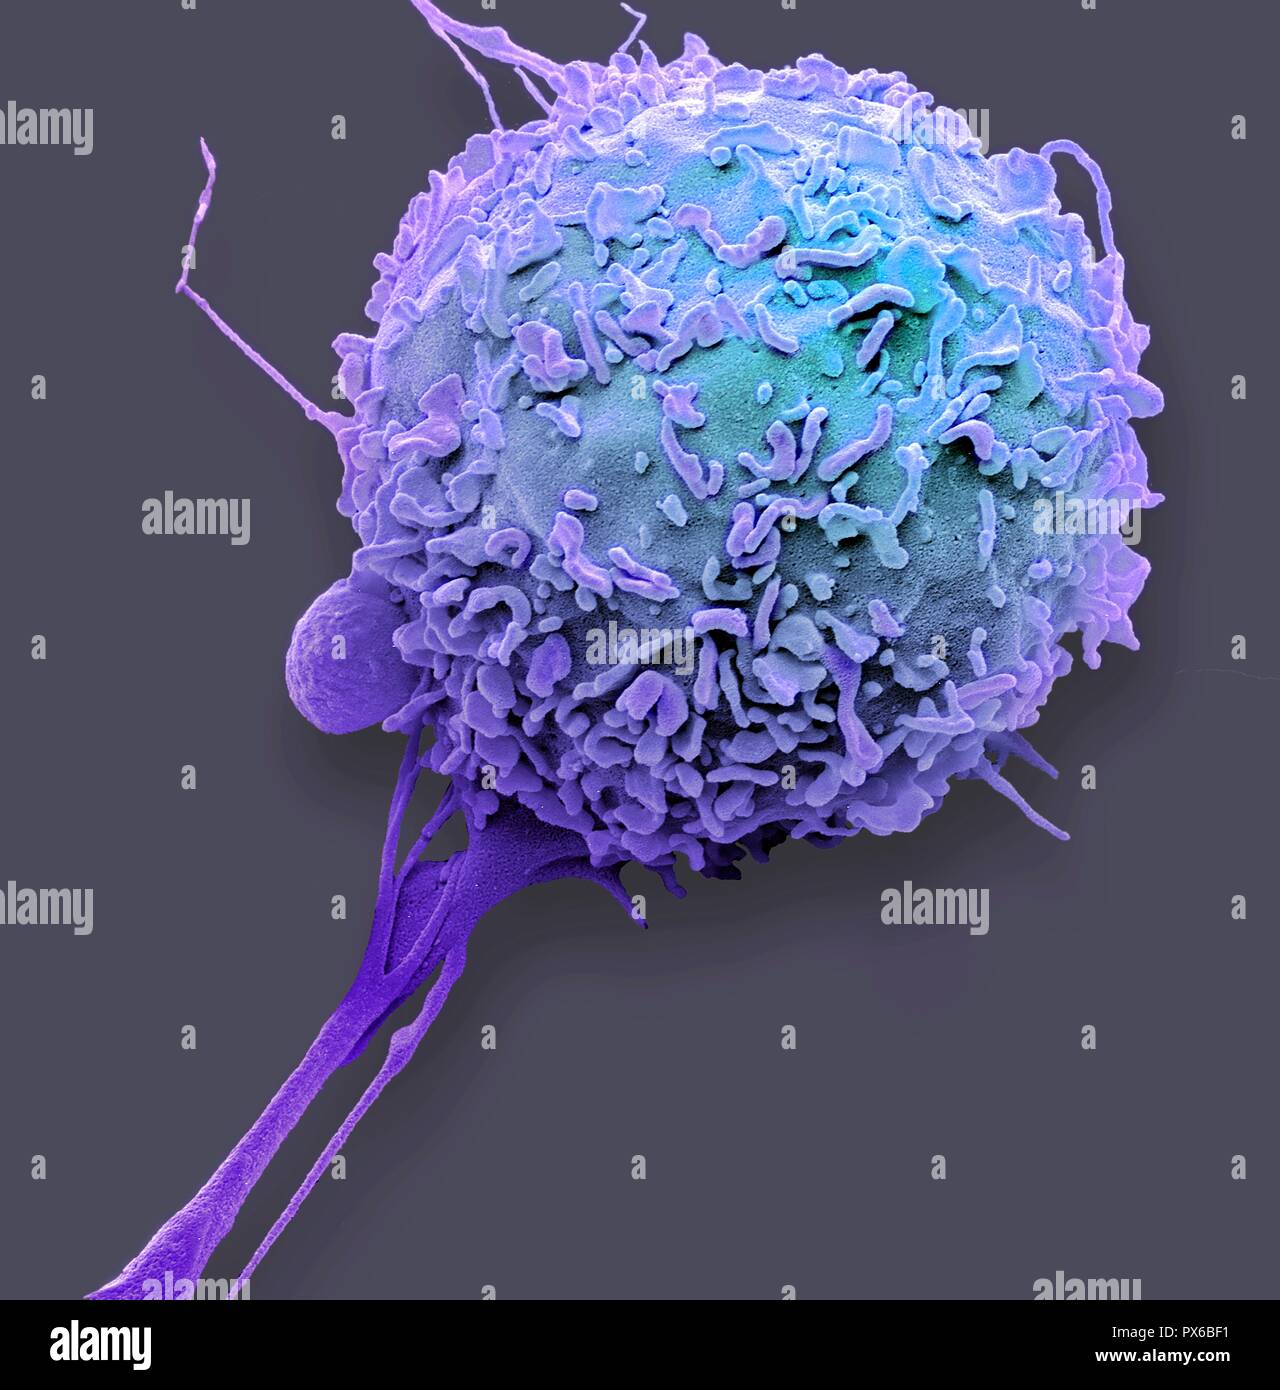 Macrophage. Coloured scanning electron micrograph (SEM) of a macrophage white blood cell. Macrophages are cells of the body's immune system. They are found in the tissues rather than in the circulating blood. Macrophages recognise foreign particles, including bacteria, pollen and dust, and phagocytose (engulf) and digest them. Magnification: x4000 when printed at 10 centimetres wide. Stock Photo